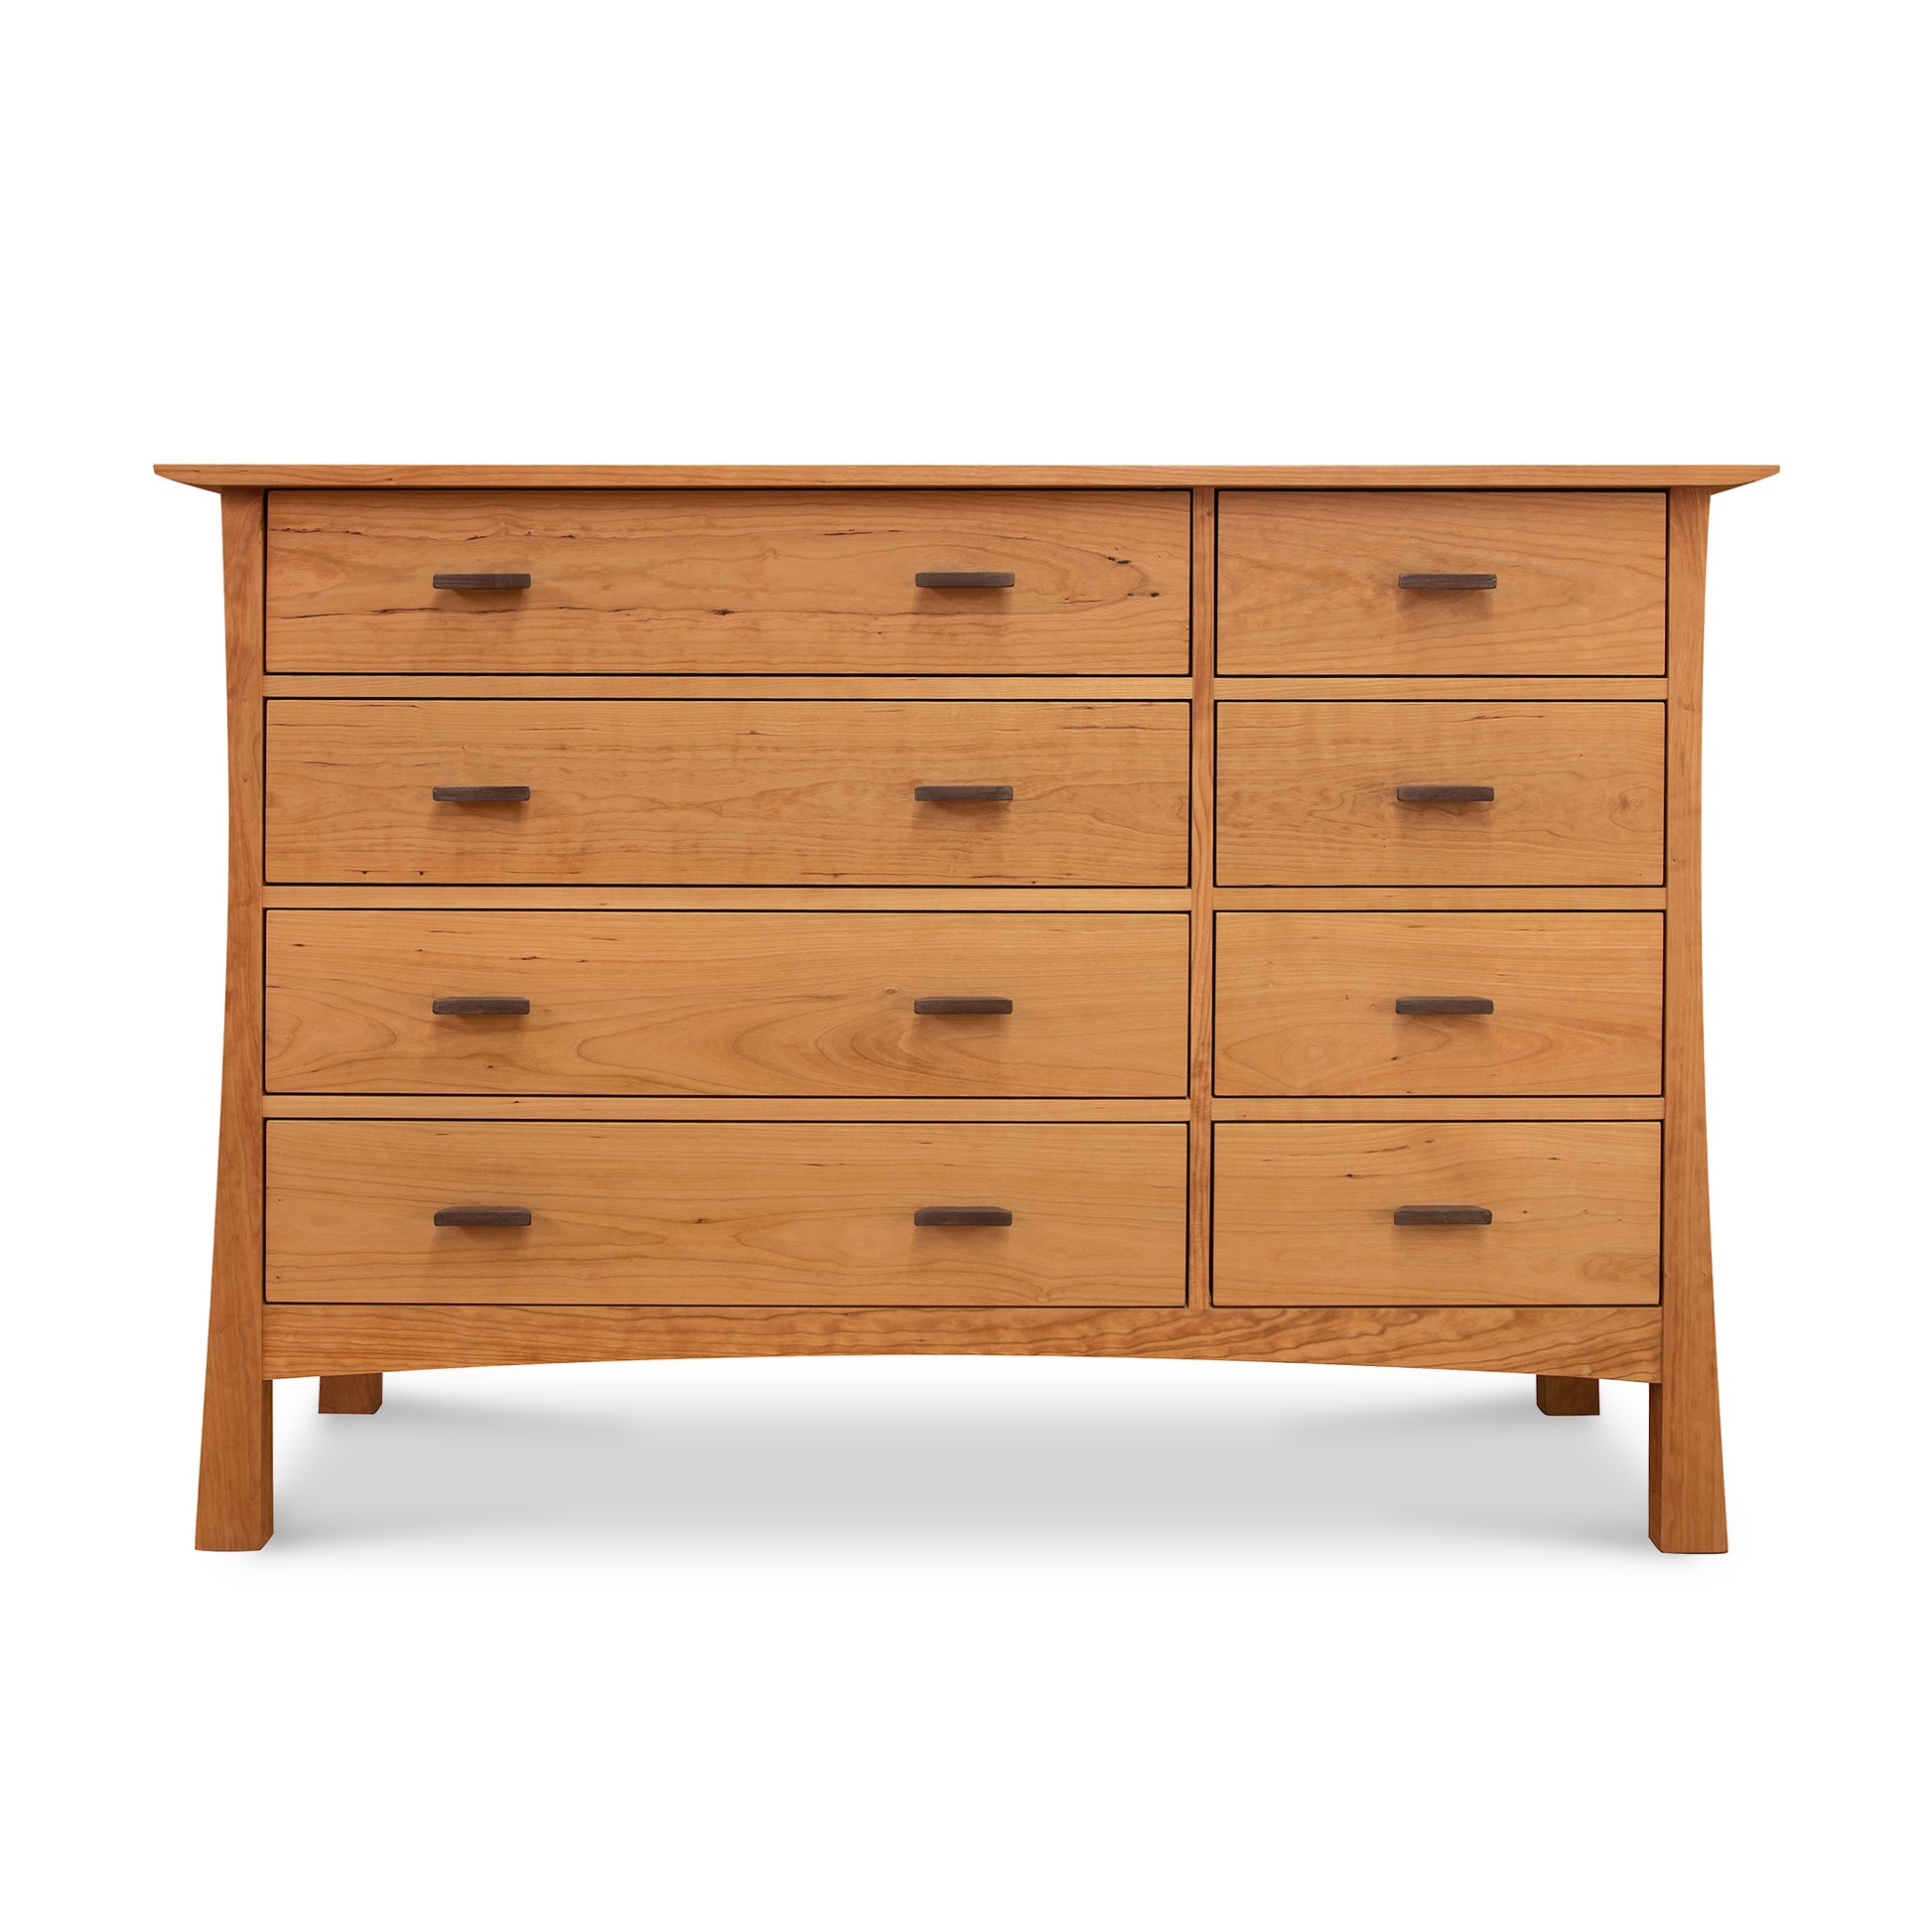 A Contemporary Craftsman 8-Drawer Dresser from Vermont Furniture Designs with multiple drawers isolated on a white background.